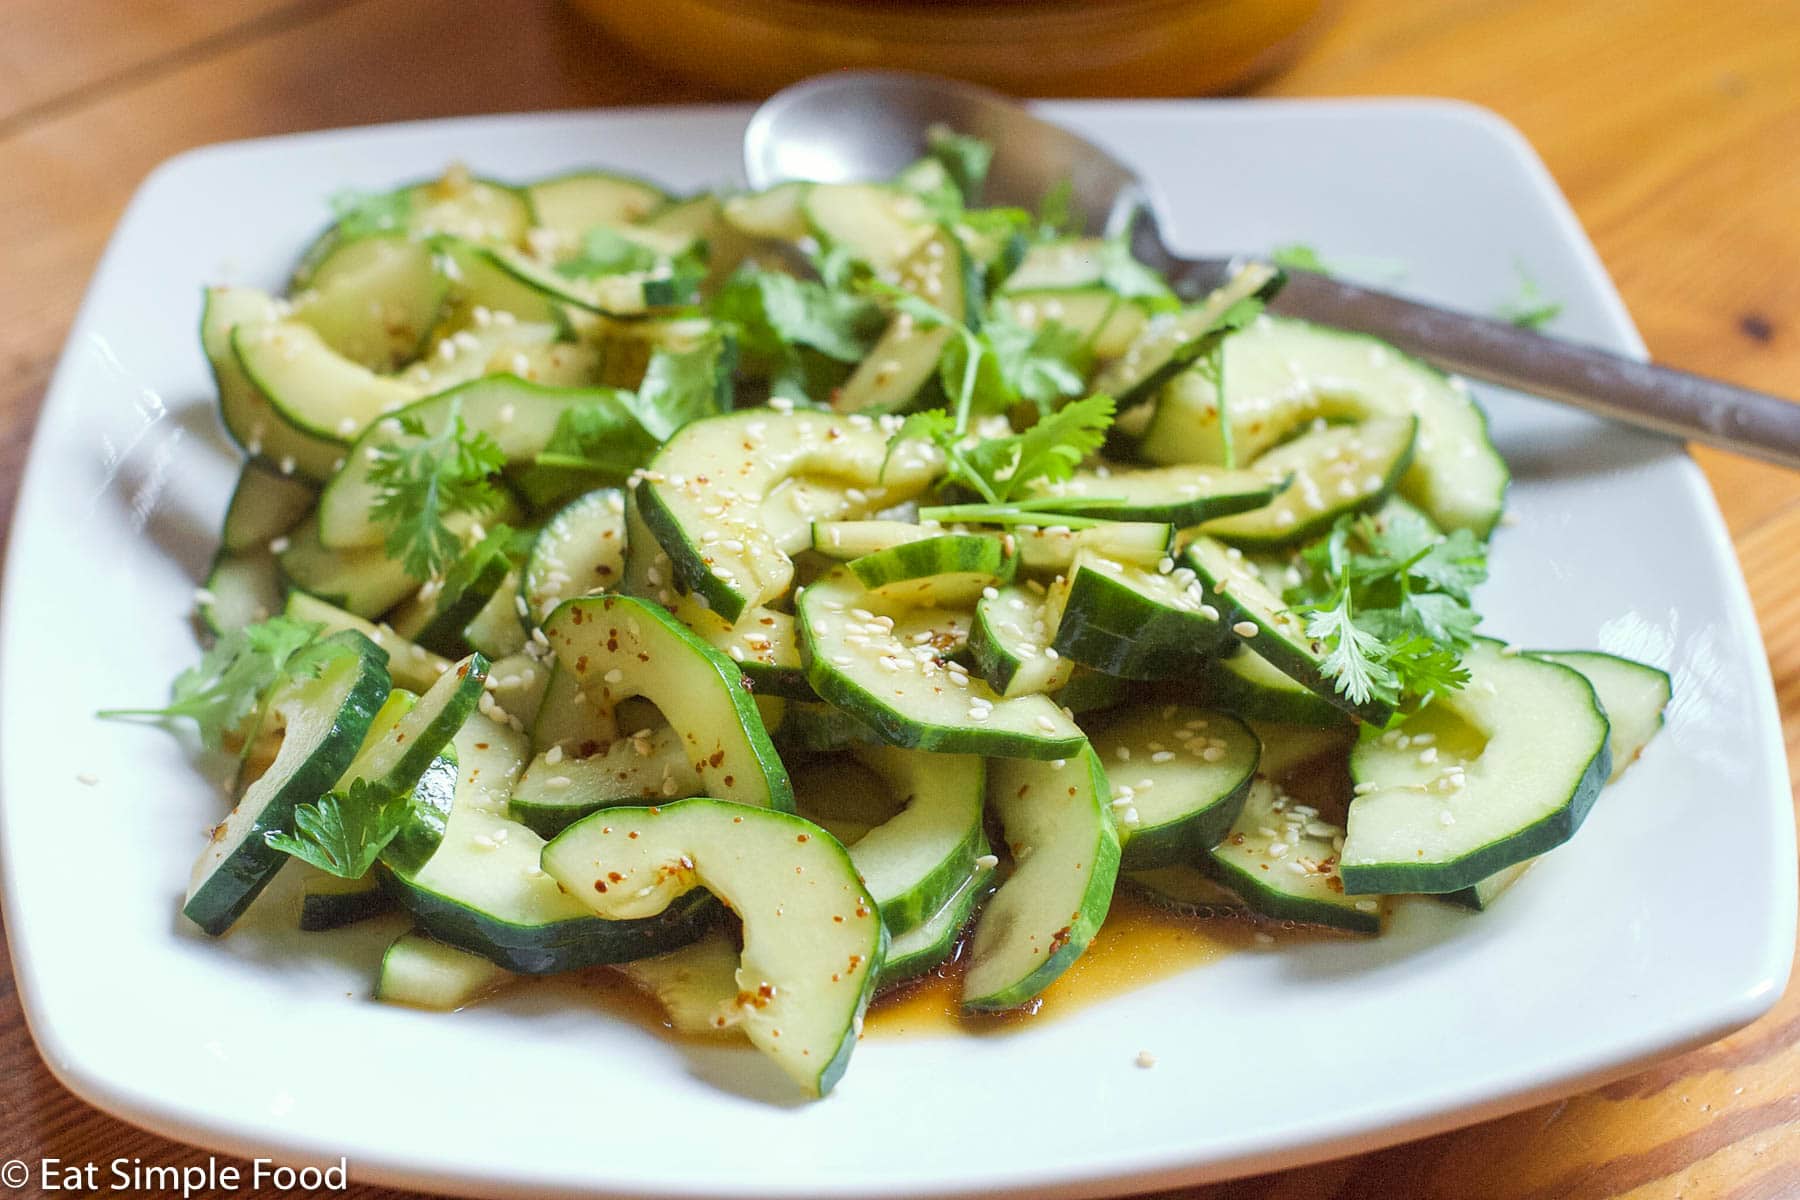 Small white plate of halved cucumbers with seeds taken out tossed in a soy / sesame oil sauce and topped with sesame seeds and cilantro. Side view.